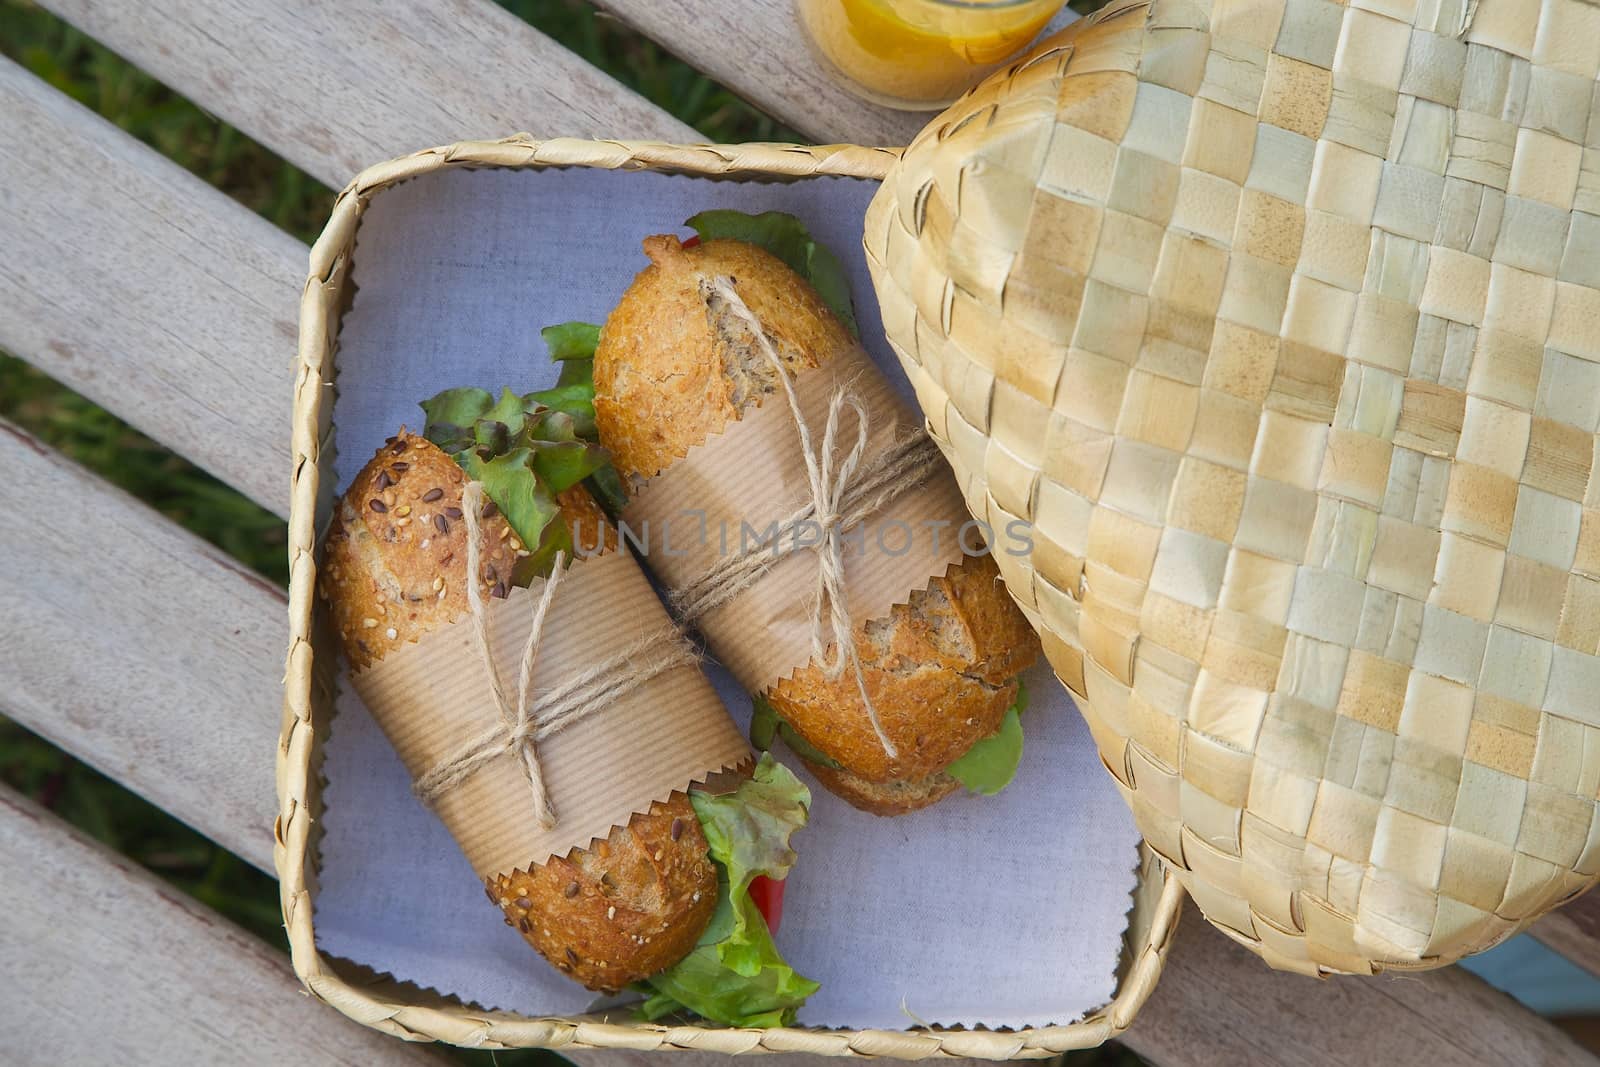 An open-air  express lunch for a vegetarian- whole grain rolls with fresh vegetables and a glass of fresh orange juice. Rolls are hidden in the woven birch basket